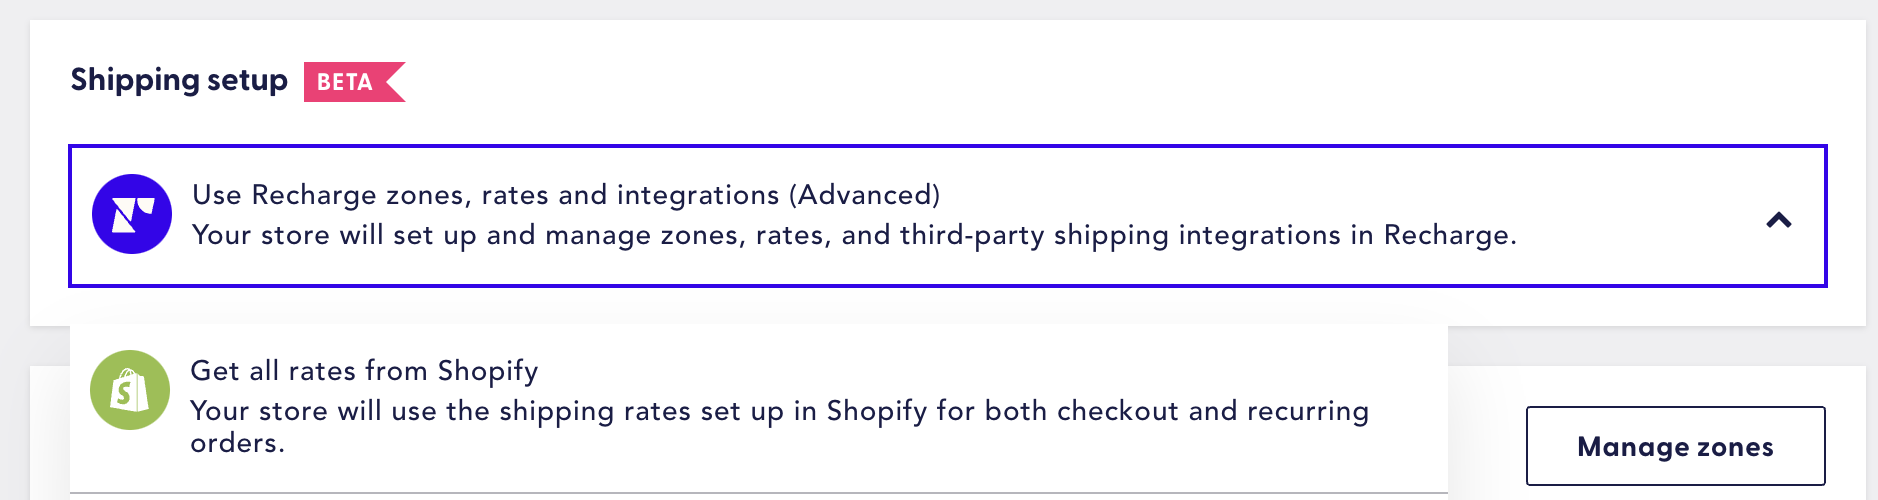 Select Recharge Zones, Rates and Integrations in Recharge shipping settings